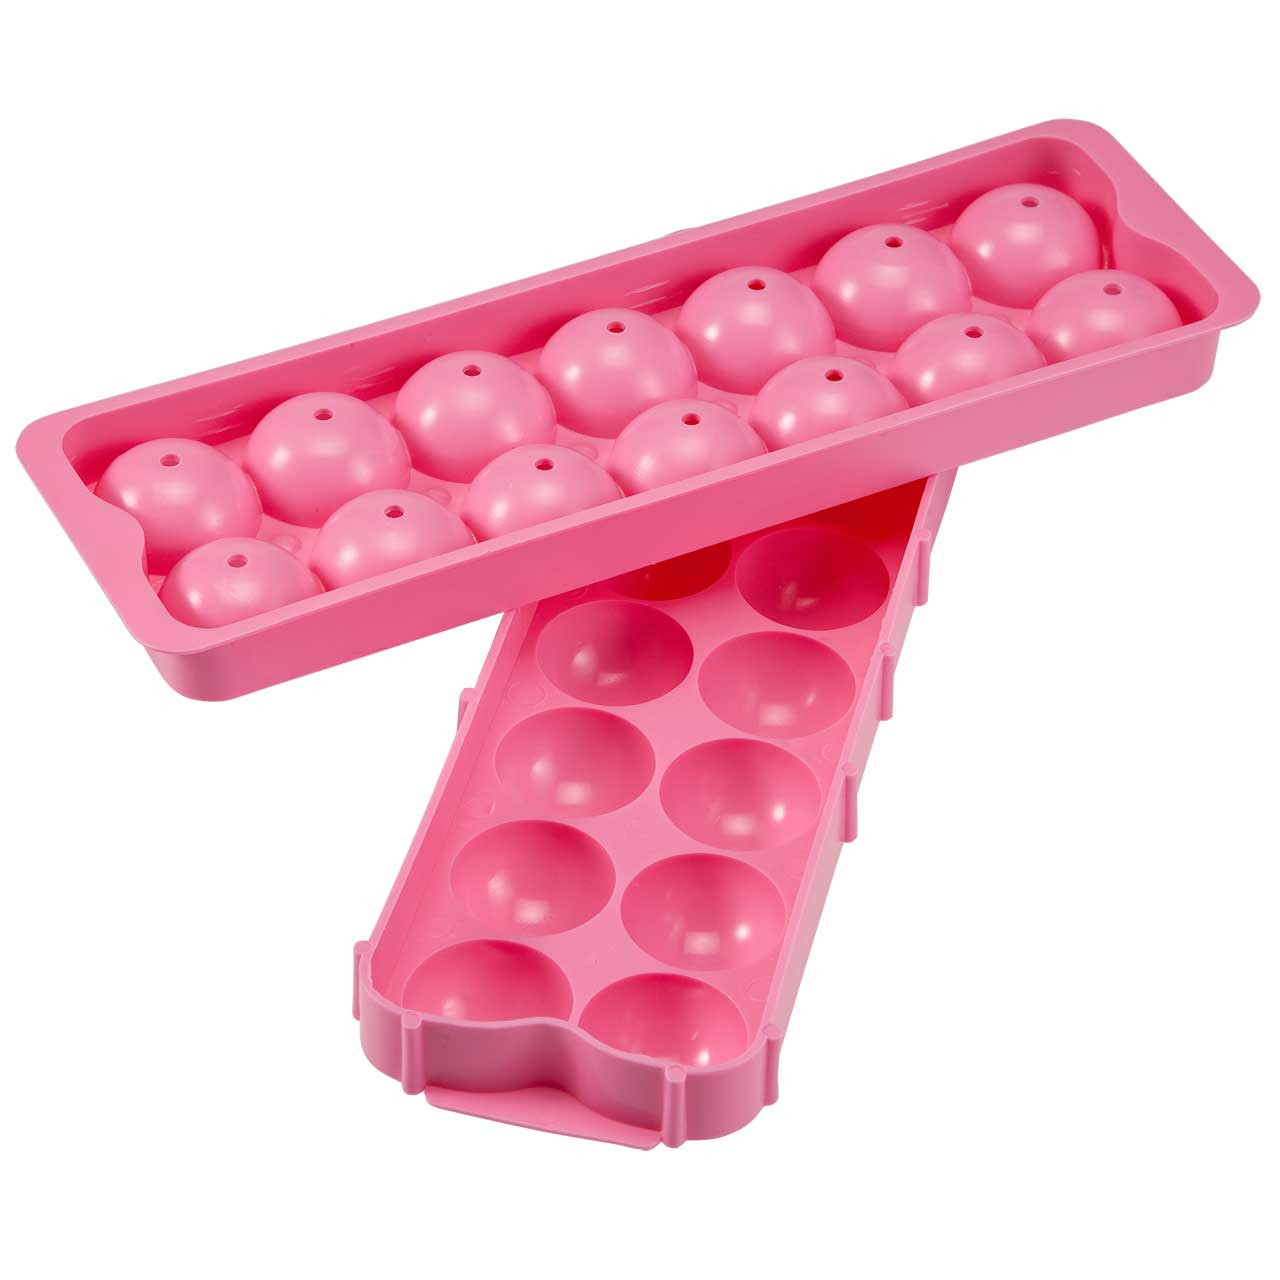 https://cdn11.bigcommerce.com/s-jtxa13/images/stencil/1280x1280/products/1650/4679/15_Ice_Ball_Tray_Small_Pink__07510.1672590346.jpg?c=2